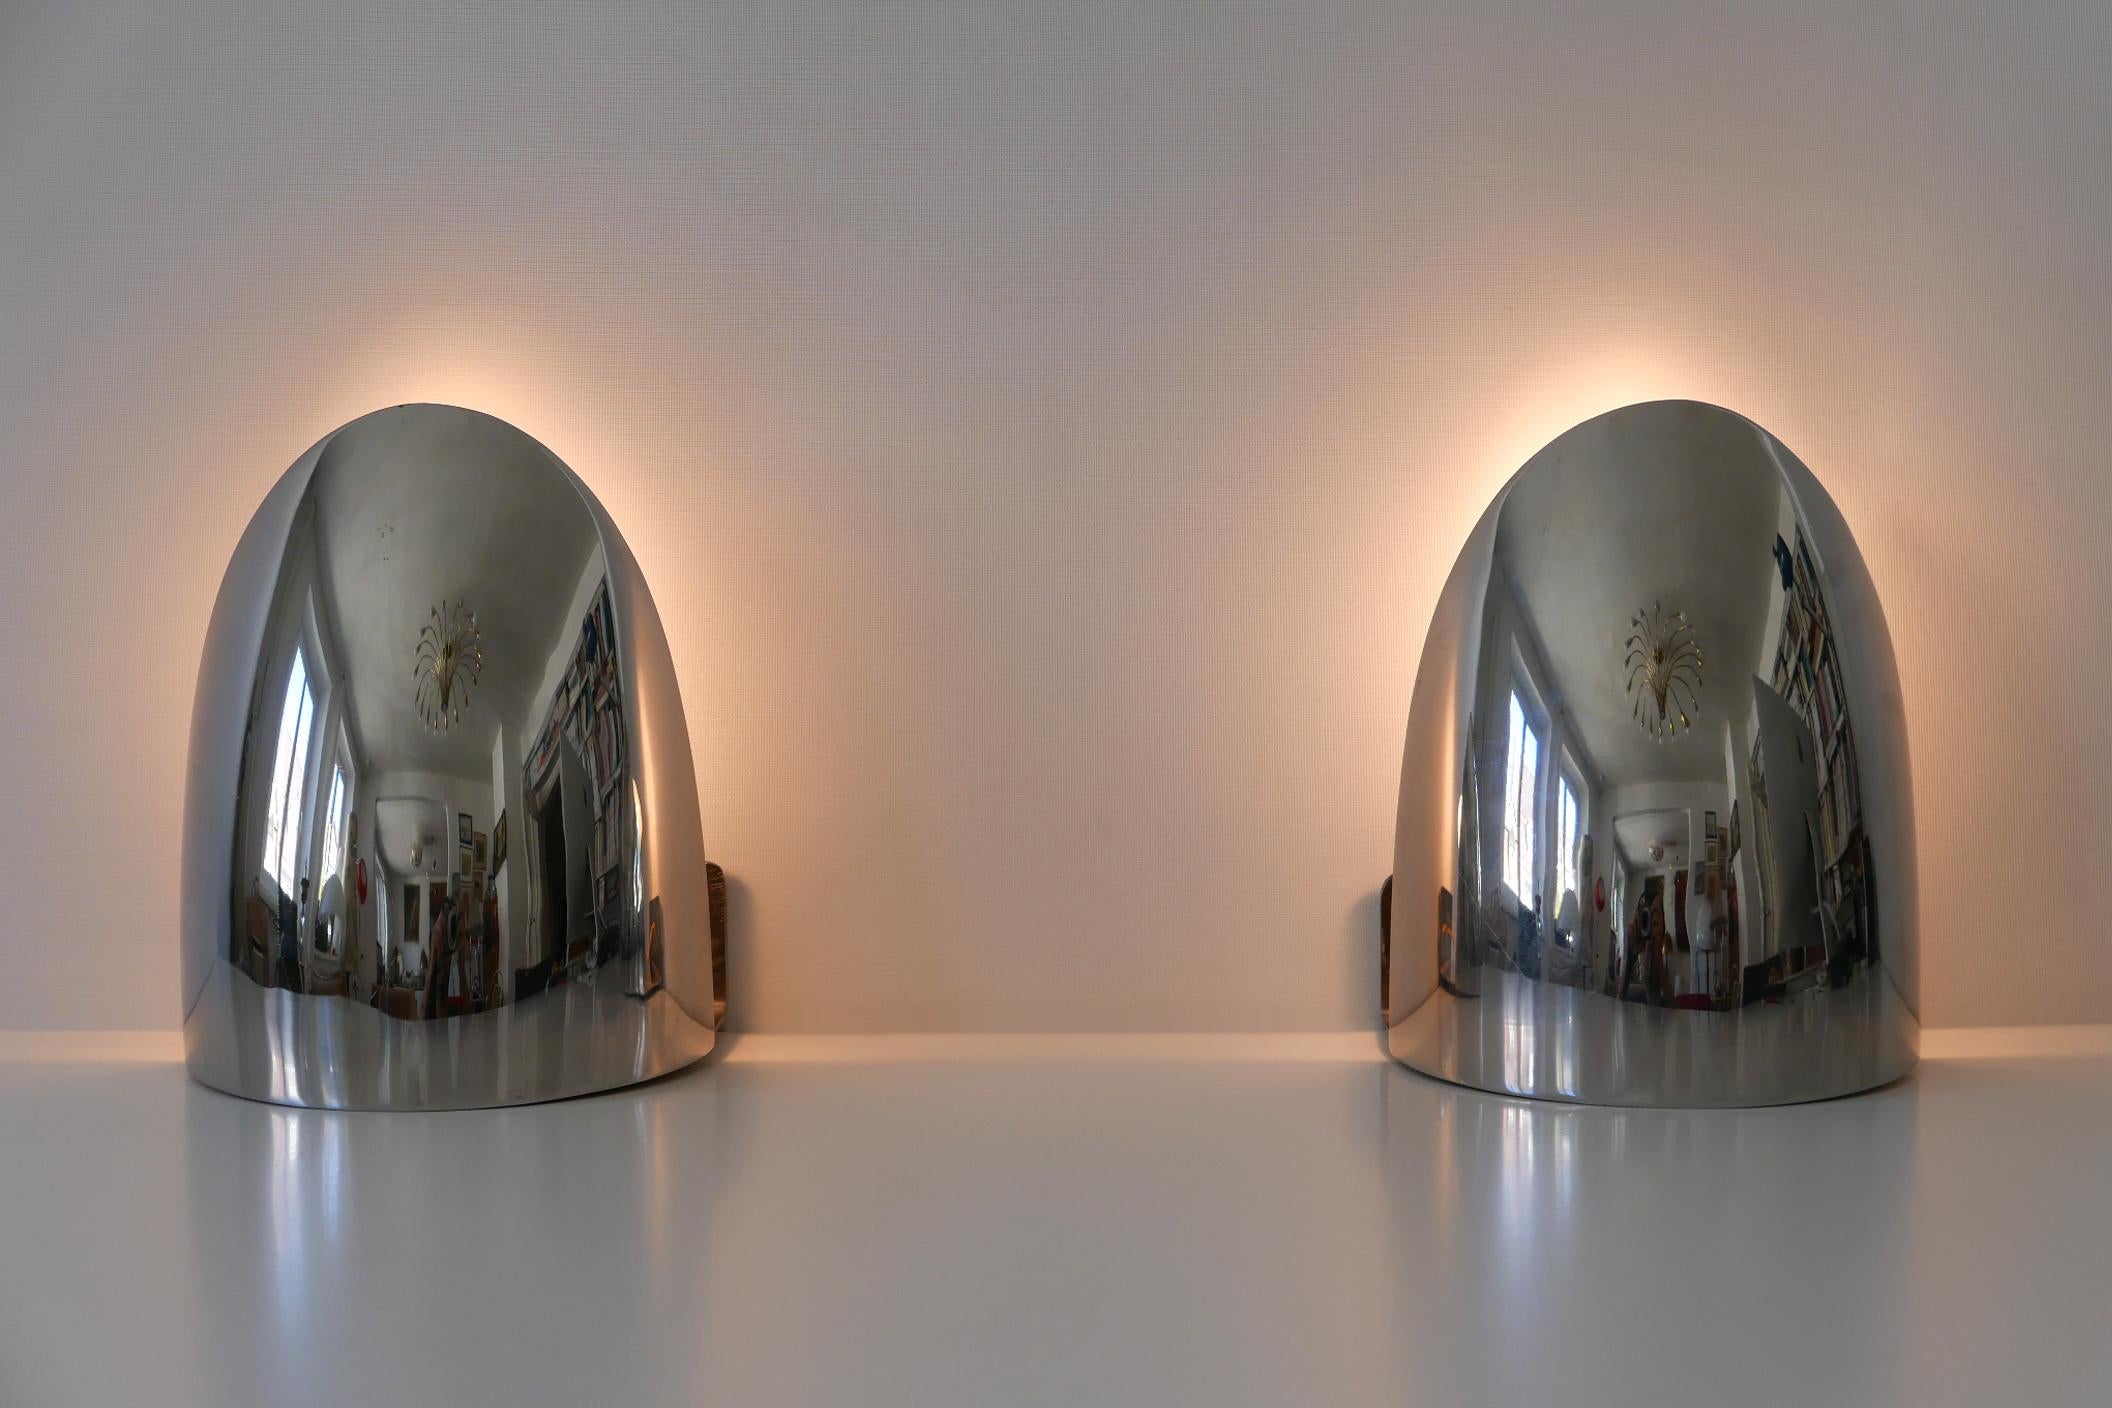 Set of Two Mid-Century Modern Wall Lamps or Sconces, 1970s, Germany For Sale 1